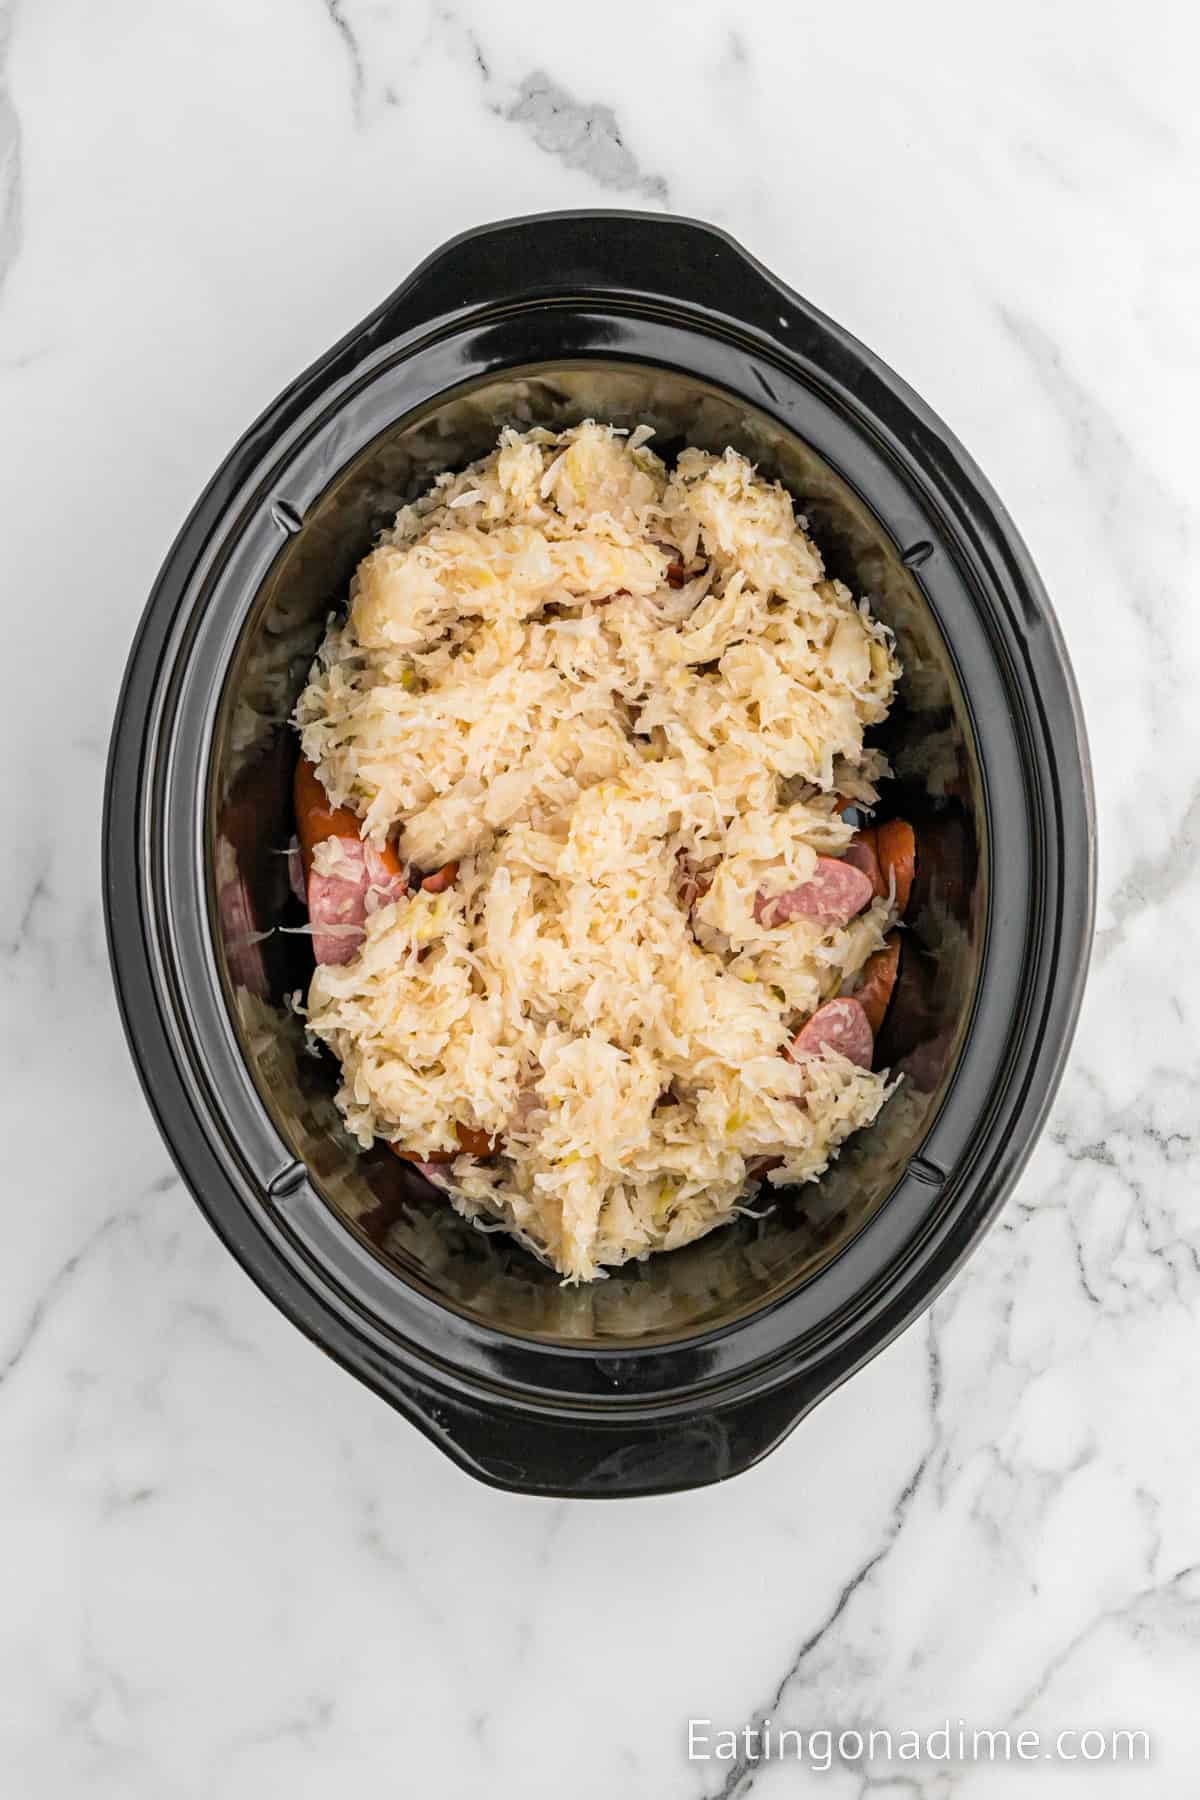 A slow cooker filled with Slow Cooker Kielbasa and Sauerkraut, along with chopped sausages or hot dogs and shredded meat, sits on a marbled countertop. The ingredients appear cooked and well-mixed within the black slow cooker pot. The website "Eatingonadime.com" is visible in the corner.